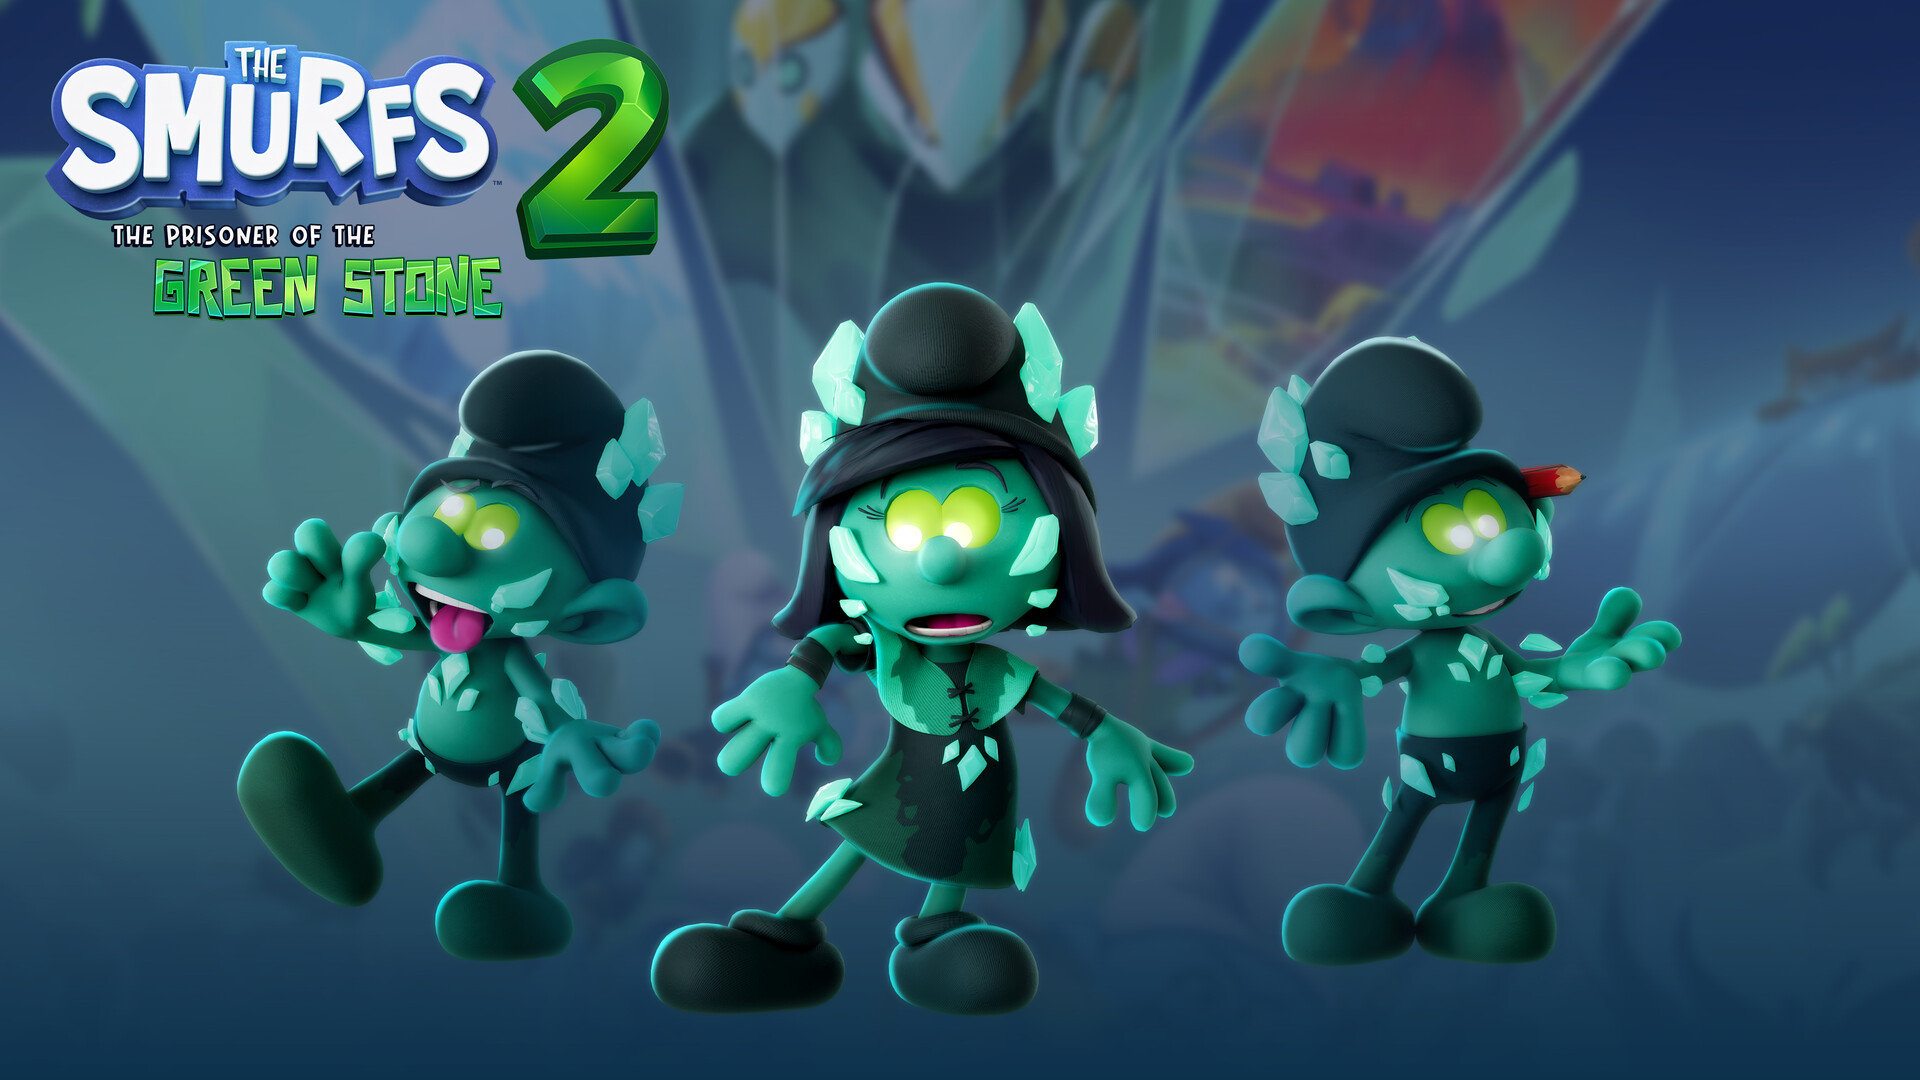 The Smurfs 2: The Prisoner of the Green Stone - Corrupted Outfit DLC GOG CD Key [$ 1.3]